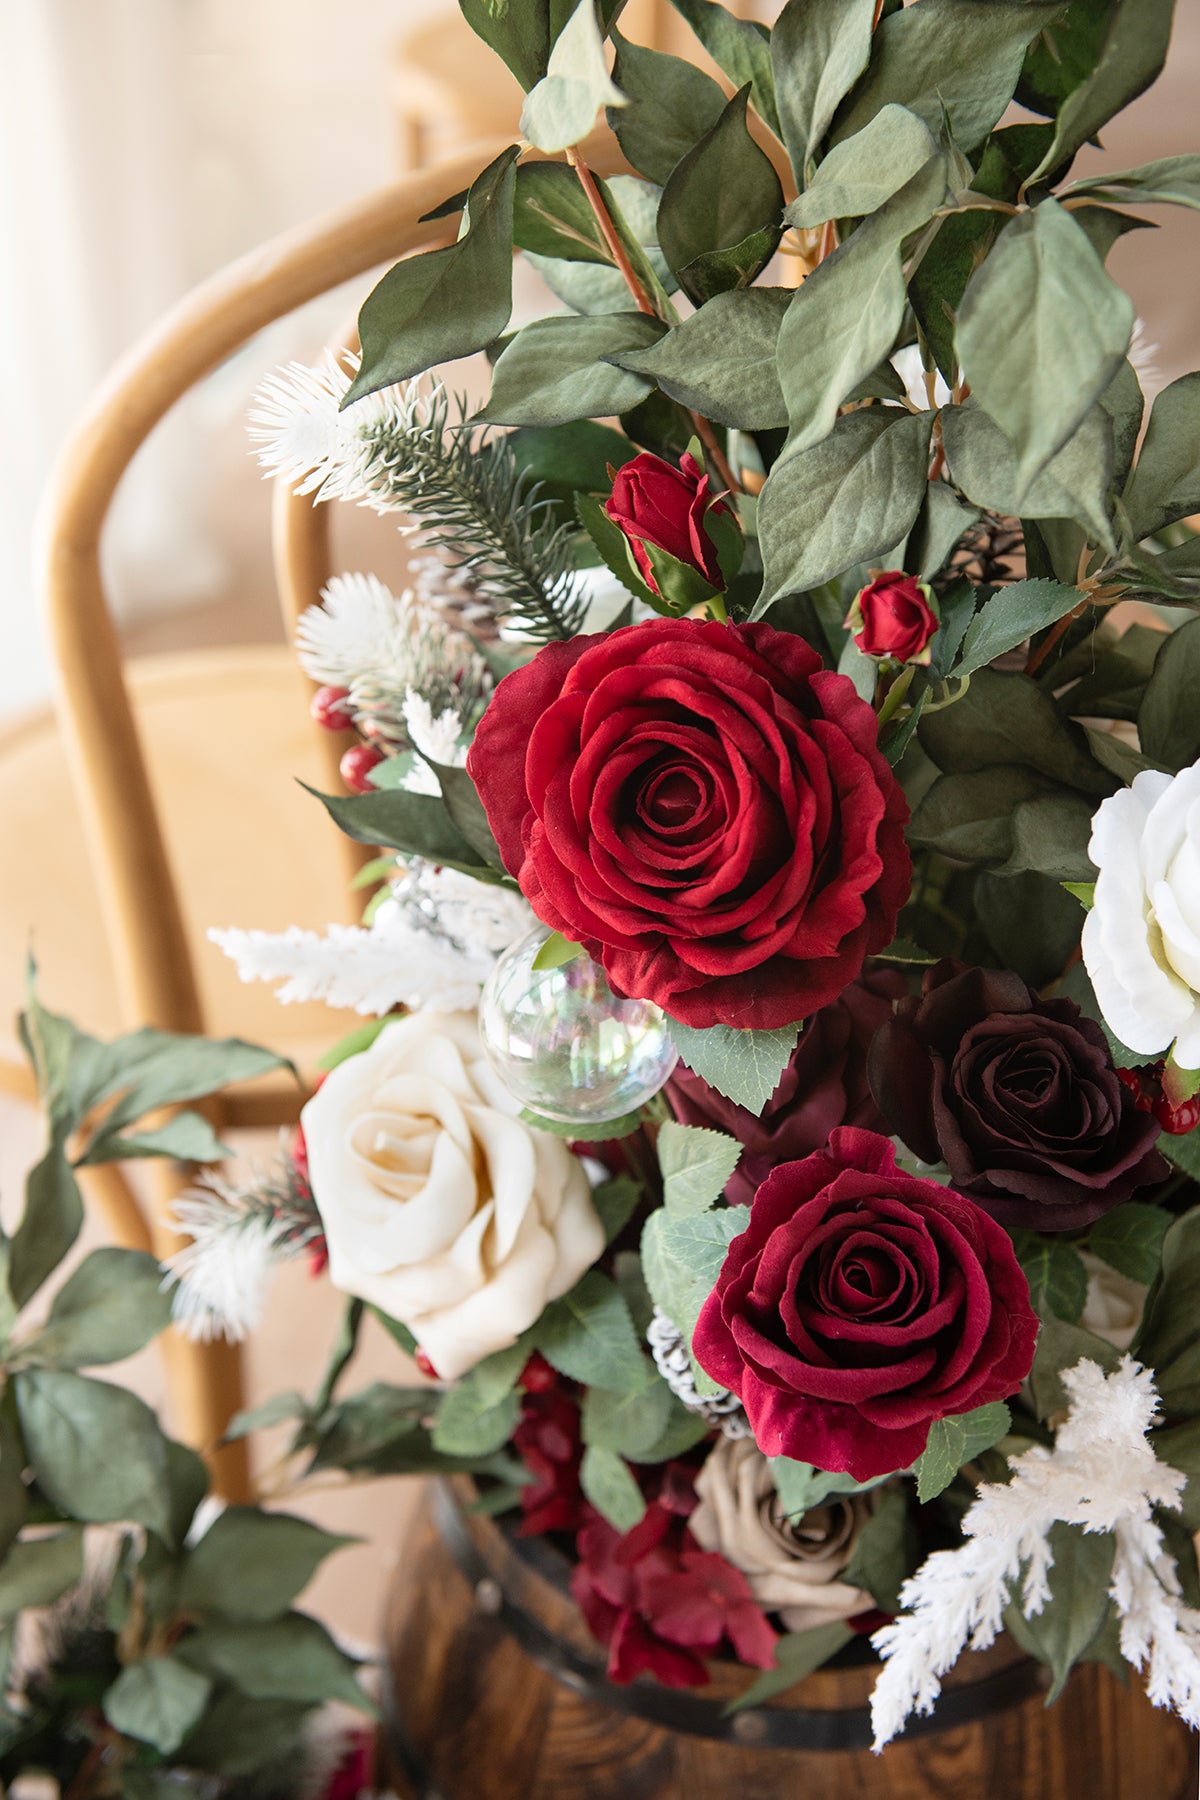 Free-Standing Flower Arrangements in Christmas Red & Sparkle